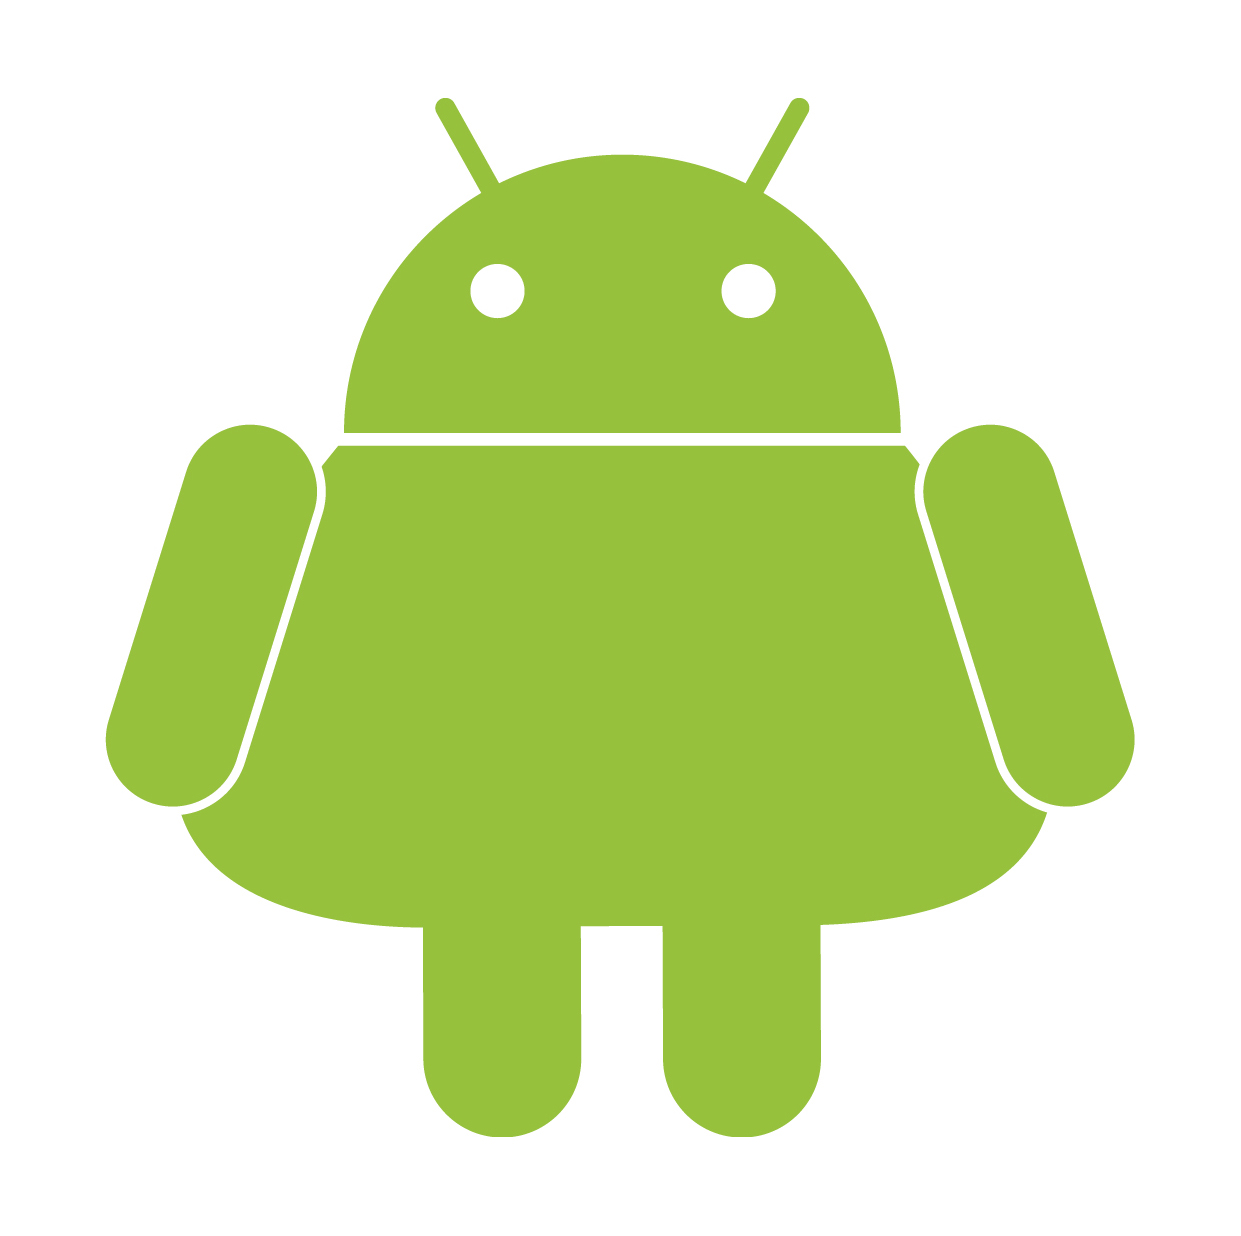 Android experience. Андроид 15s. Android 15. Android 23. Fat Android.